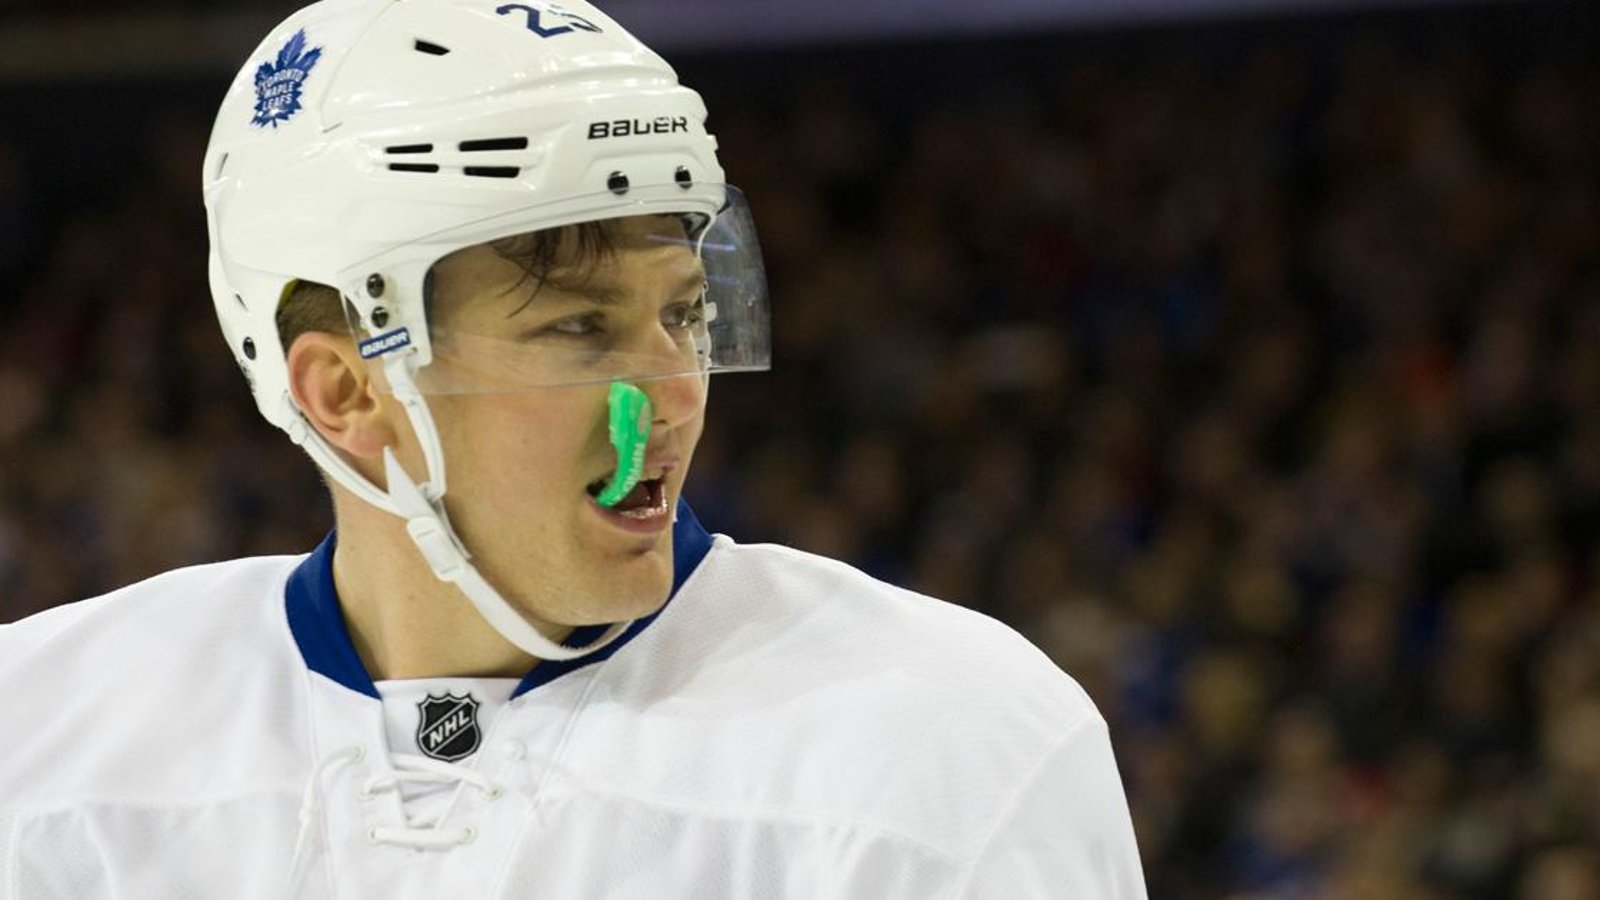 Van Riemsdyk speaks out about missing World Championship. 